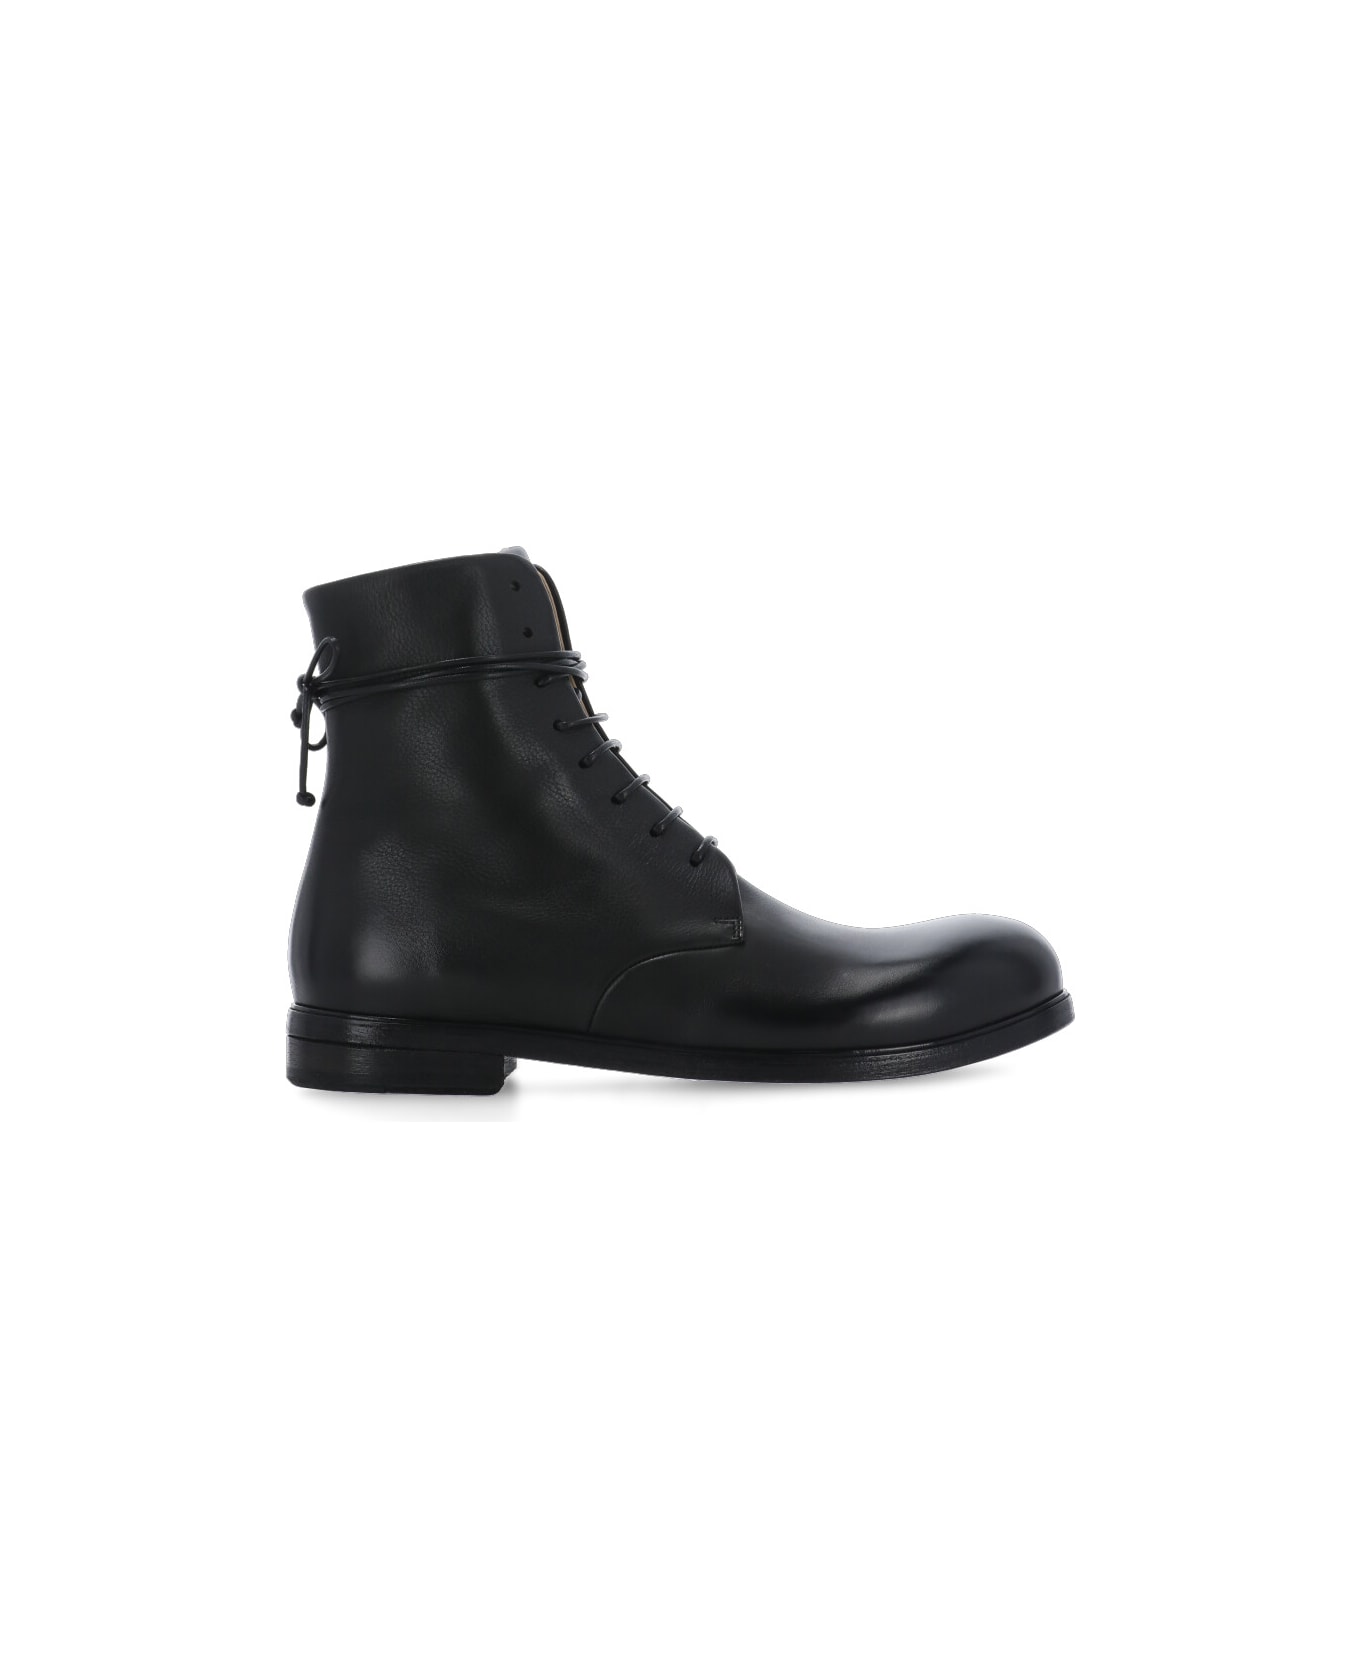 Marsell Zucca Ankle Boots - Black